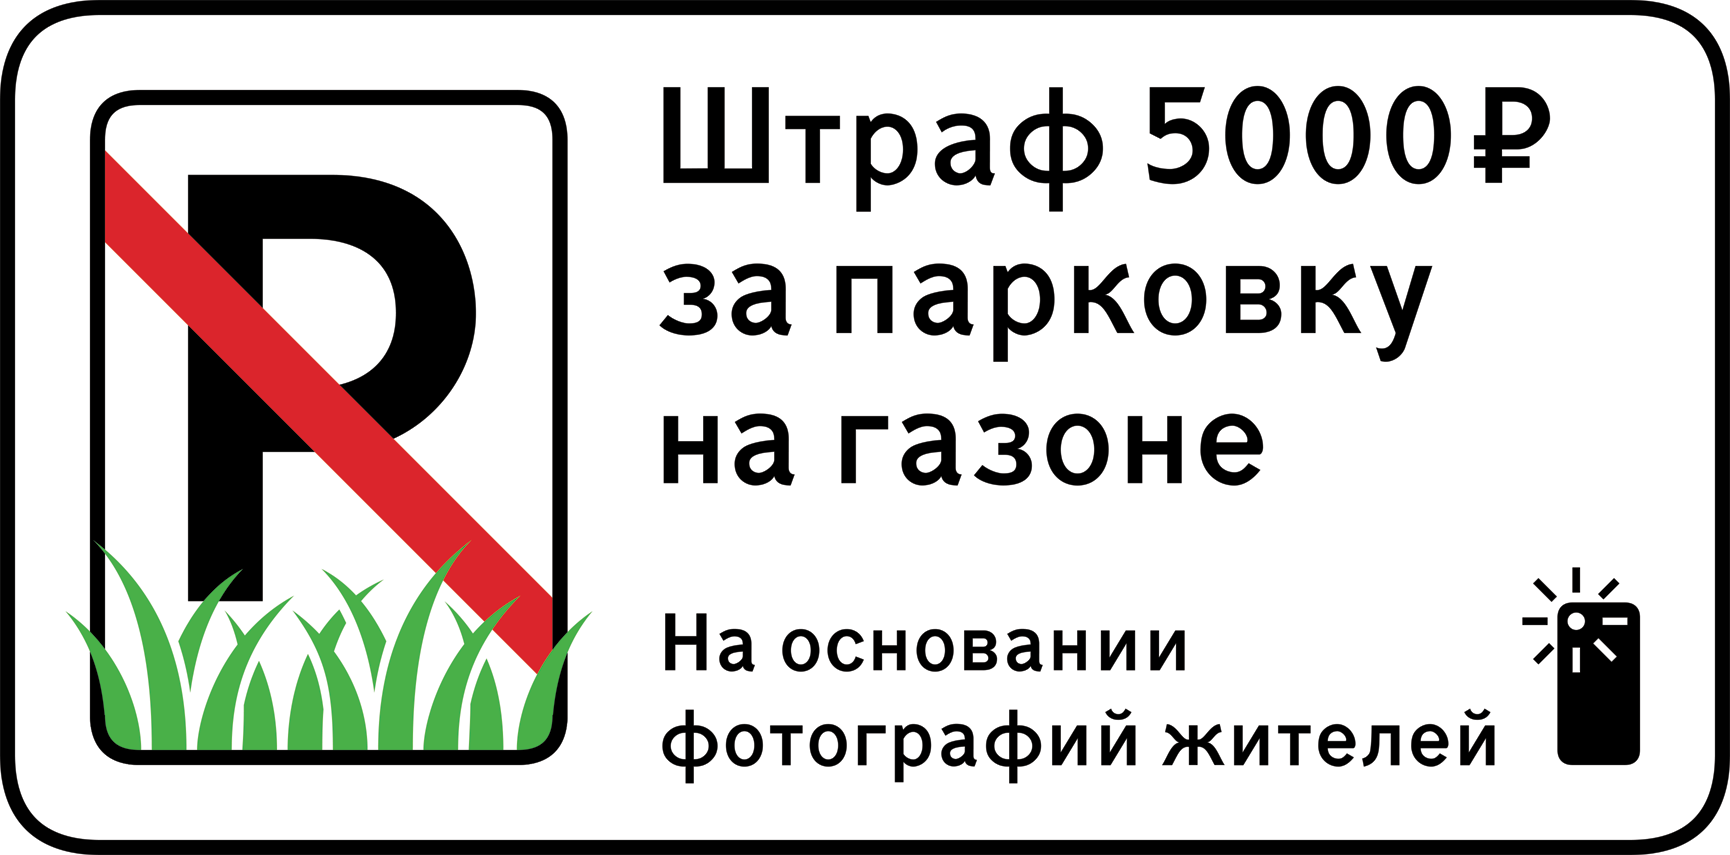 http://ilyabirman.ru/meanwhile/pictures/lawn-parking-sign@2x.png